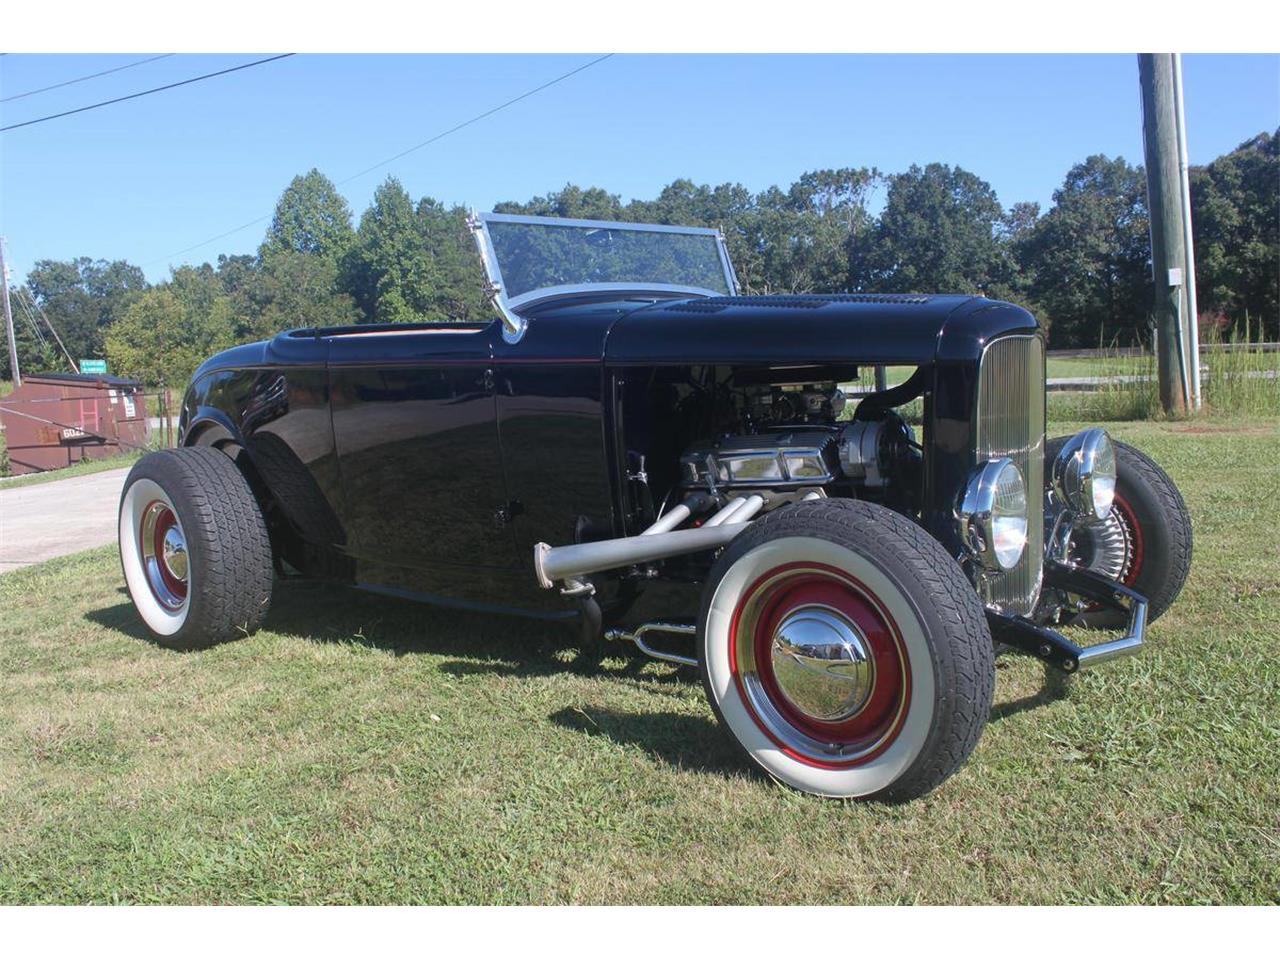 1932 Ford Brookville Roadster for Sale | ClassicCars.com | CC-1013669